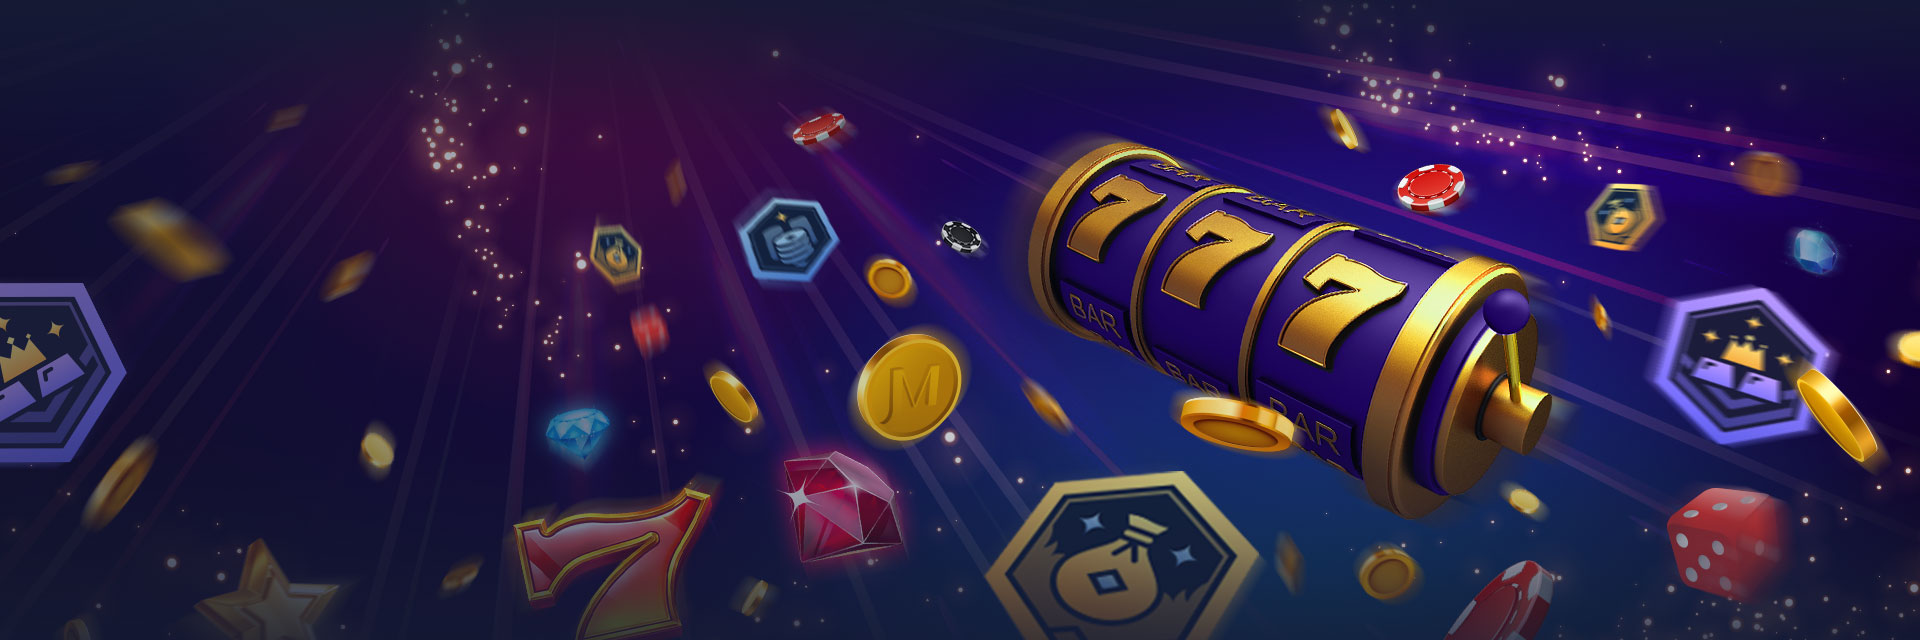 Woo Casino: Download Mobile-friendly Casino App on Your Smartphone